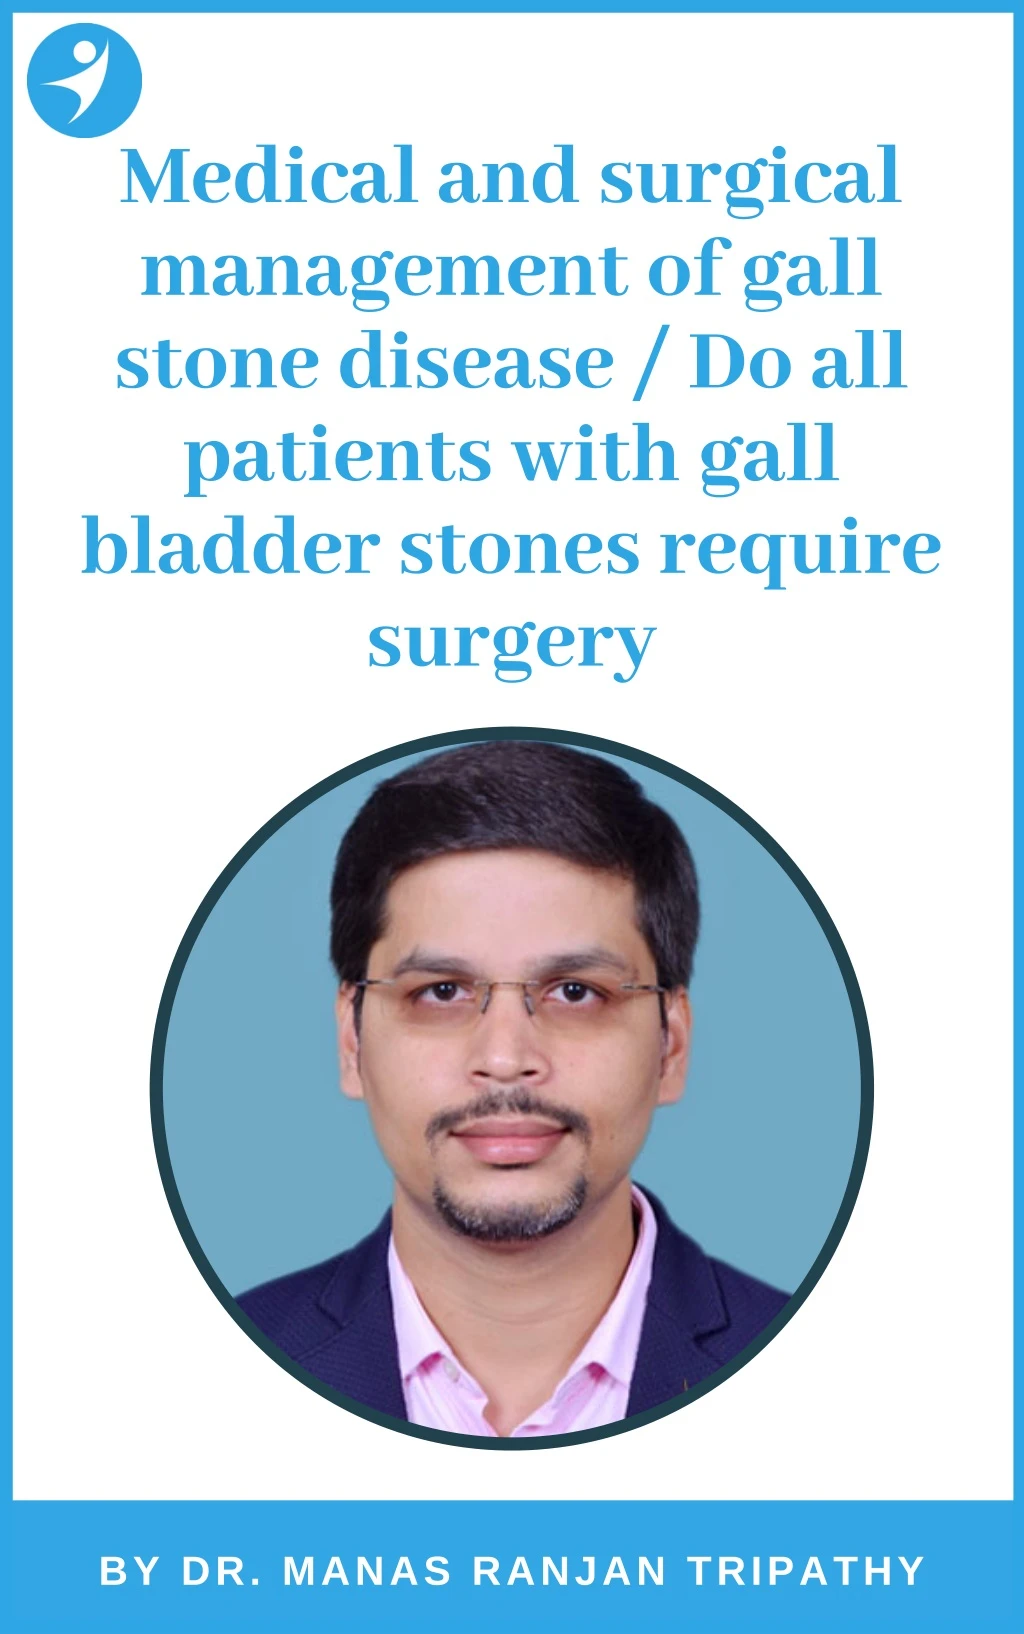 medical and surgical management of gall stone